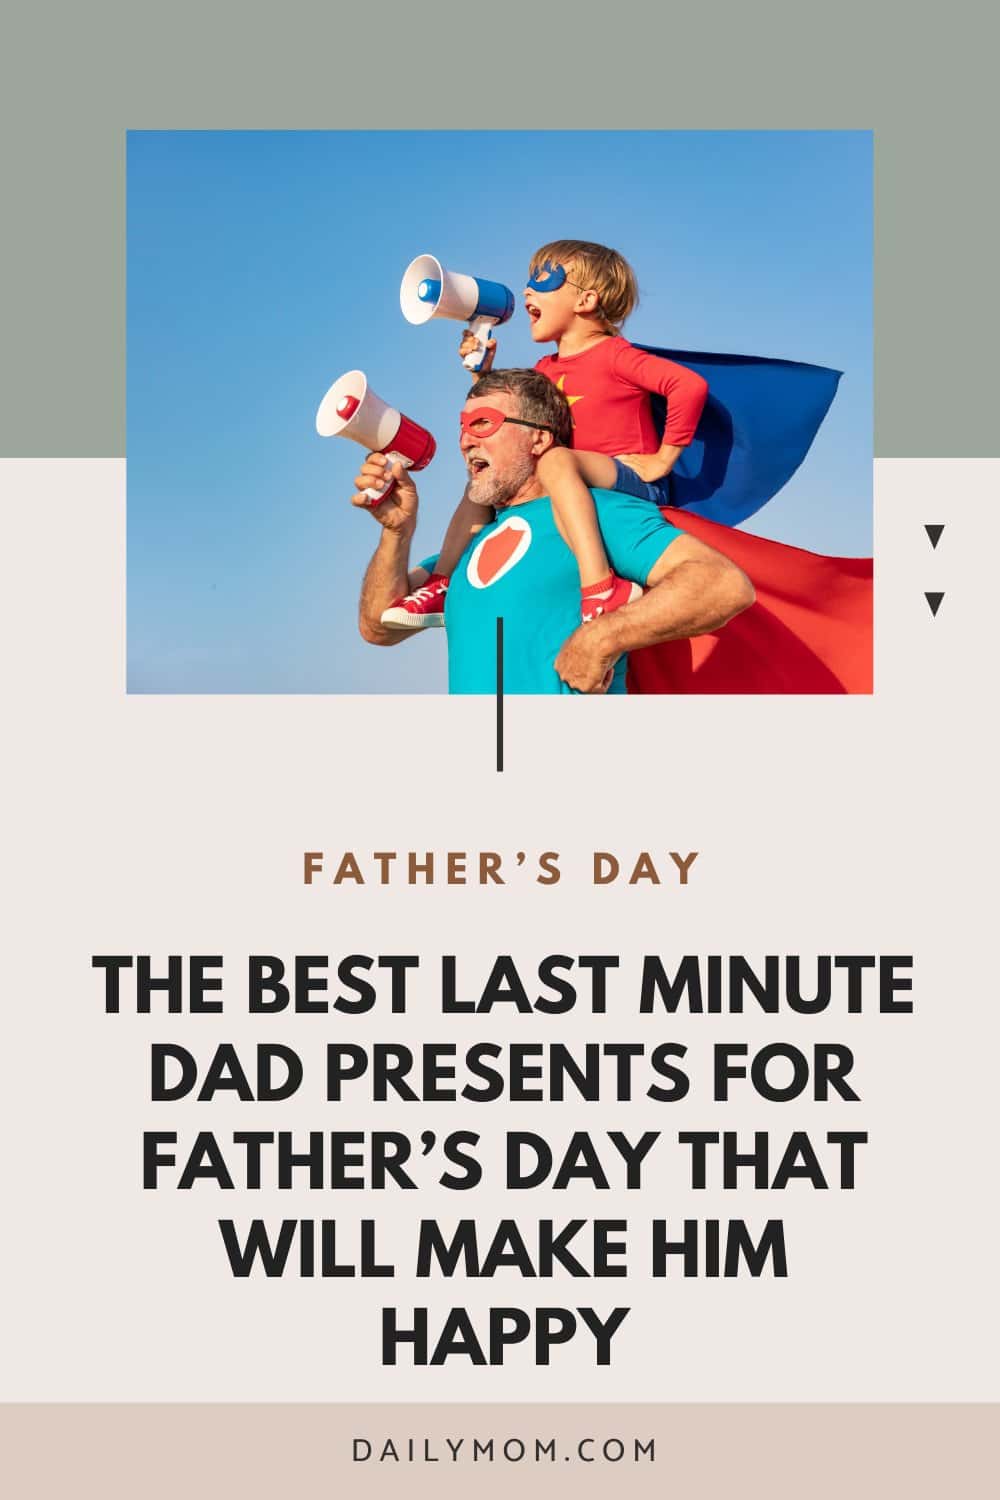 The Best Last Minute Dad Presents For Father'S Day That Will Make Him Happy 91 Daily Mom, Magazine For Families